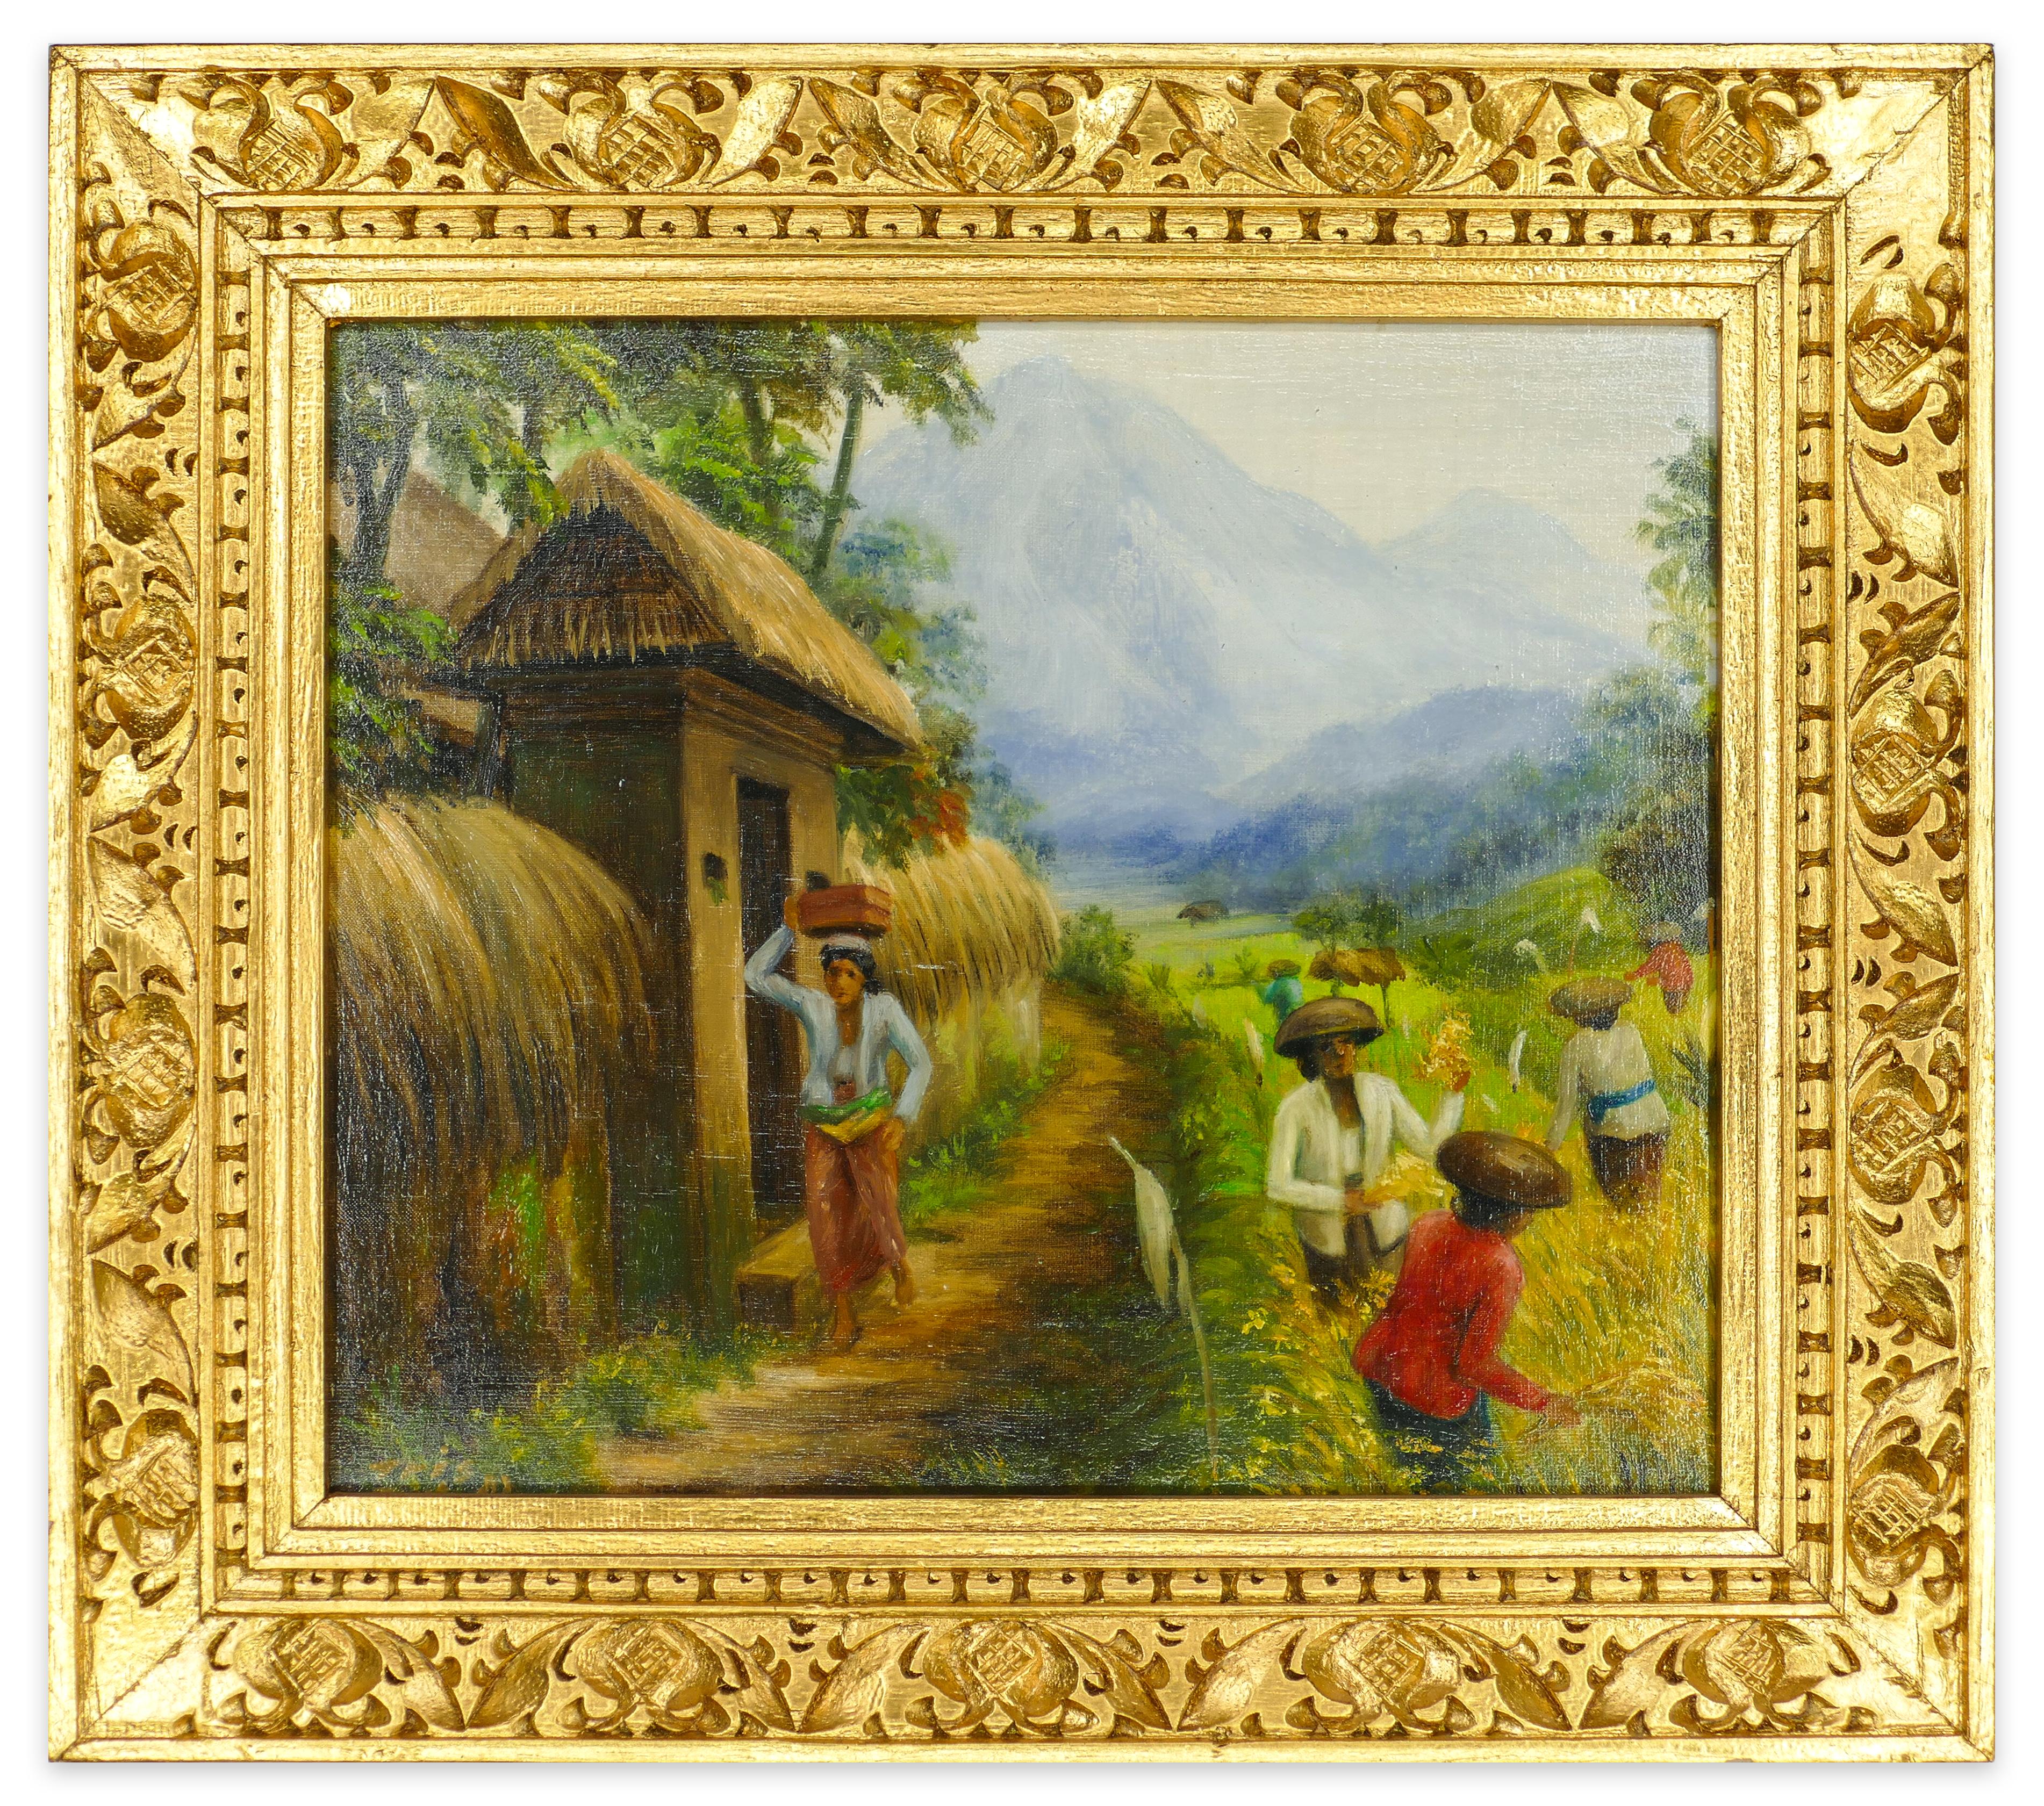 Rice Weeders at Work - Oil on Canvas Bali School - Mid 20th Century - Painting by Unknown